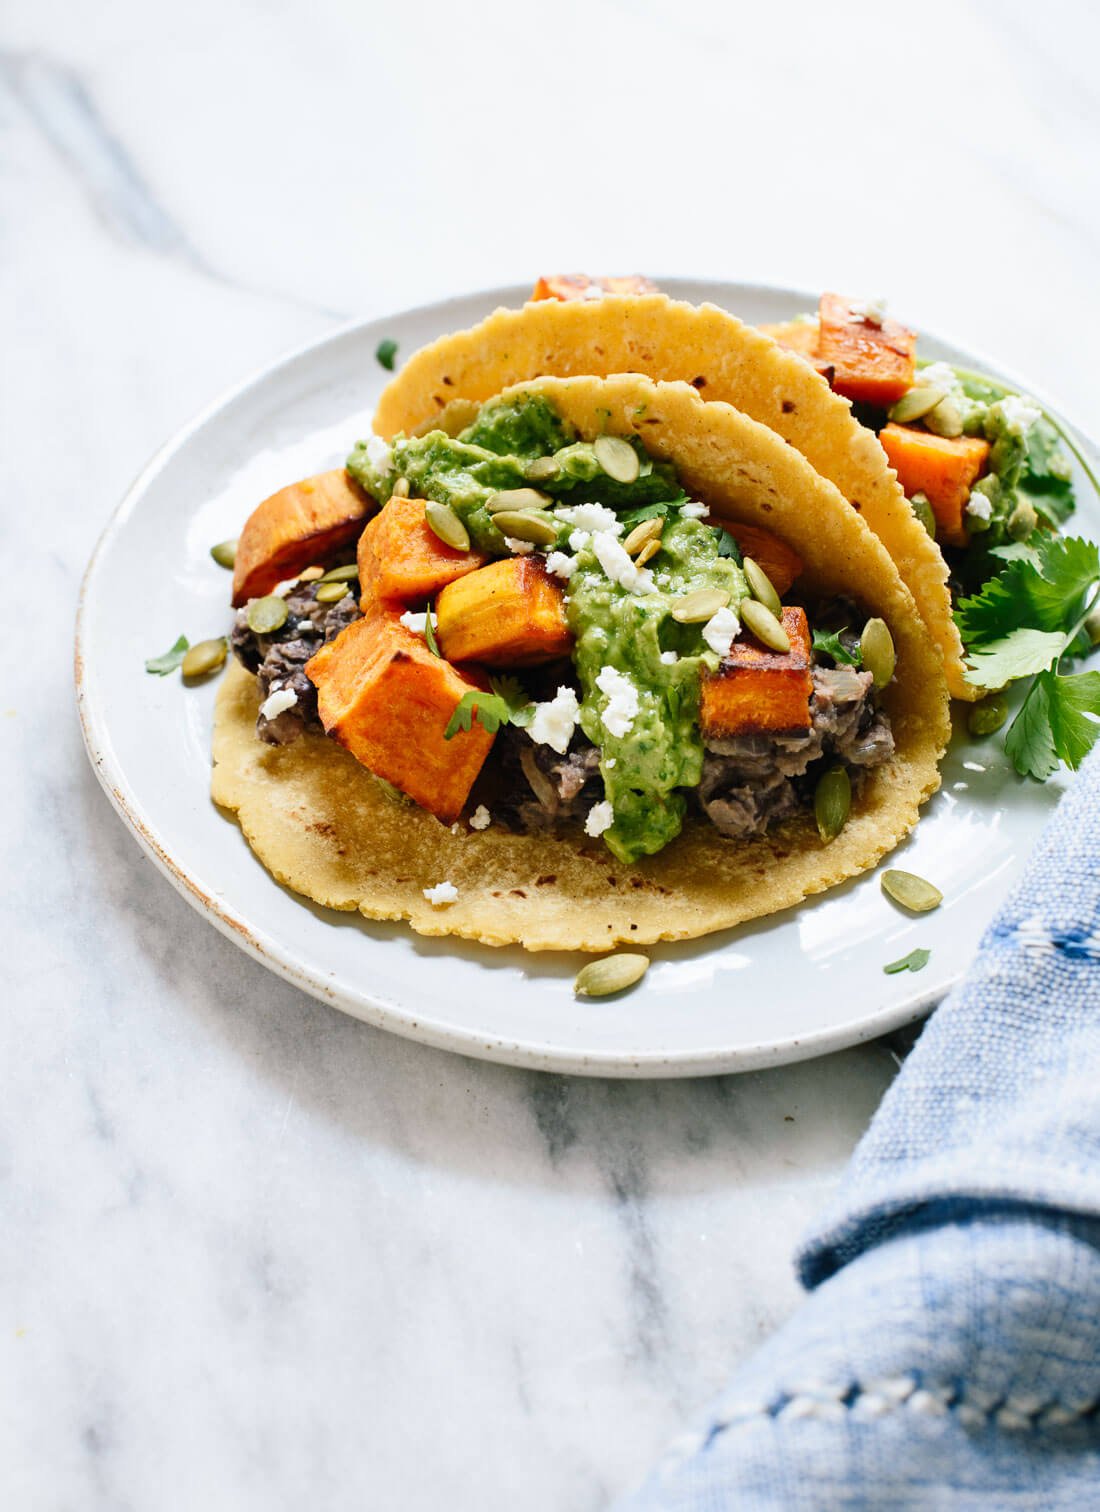 These roasted sweet potato tacos feature spicy black beans and avocado-pepita dip. Delicious! This taco recipe is vegetarian (easily vegan) and gluten-free. cookieandkate.com